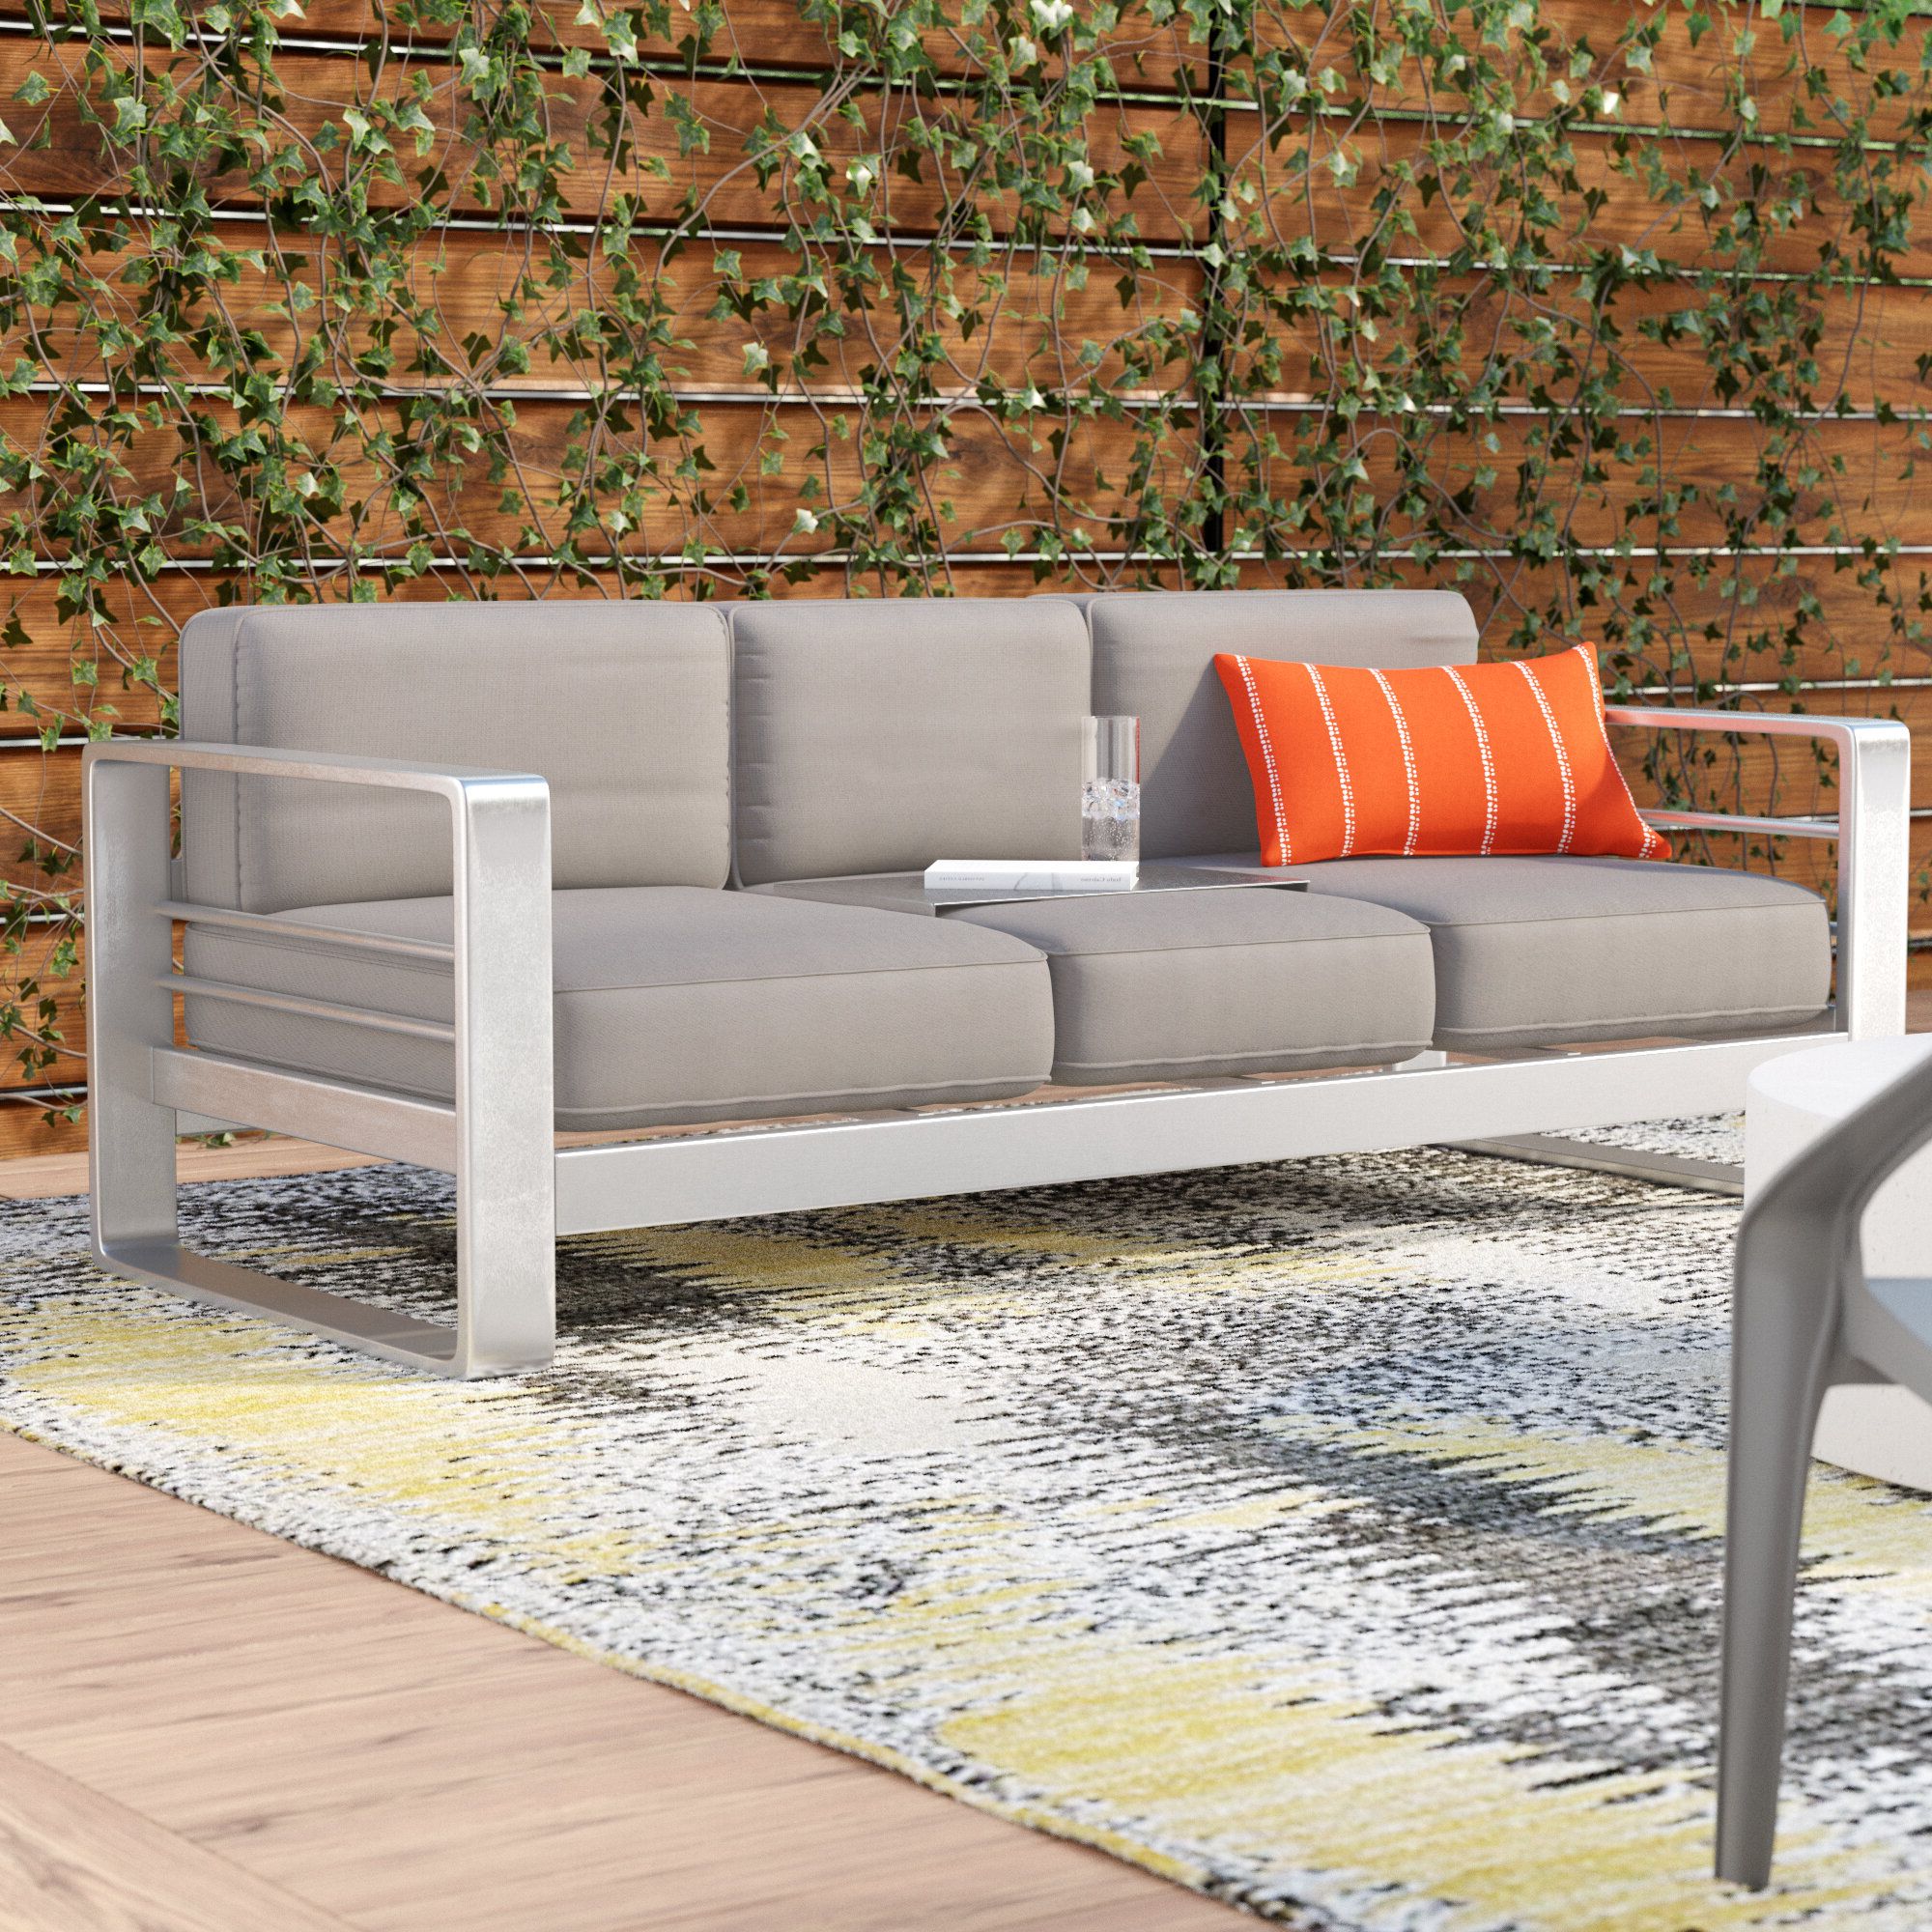 Best And Newest Royalston Patio Sofa With Cushions For Lobdell Patio Sofas With Cushions (View 11 of 25)